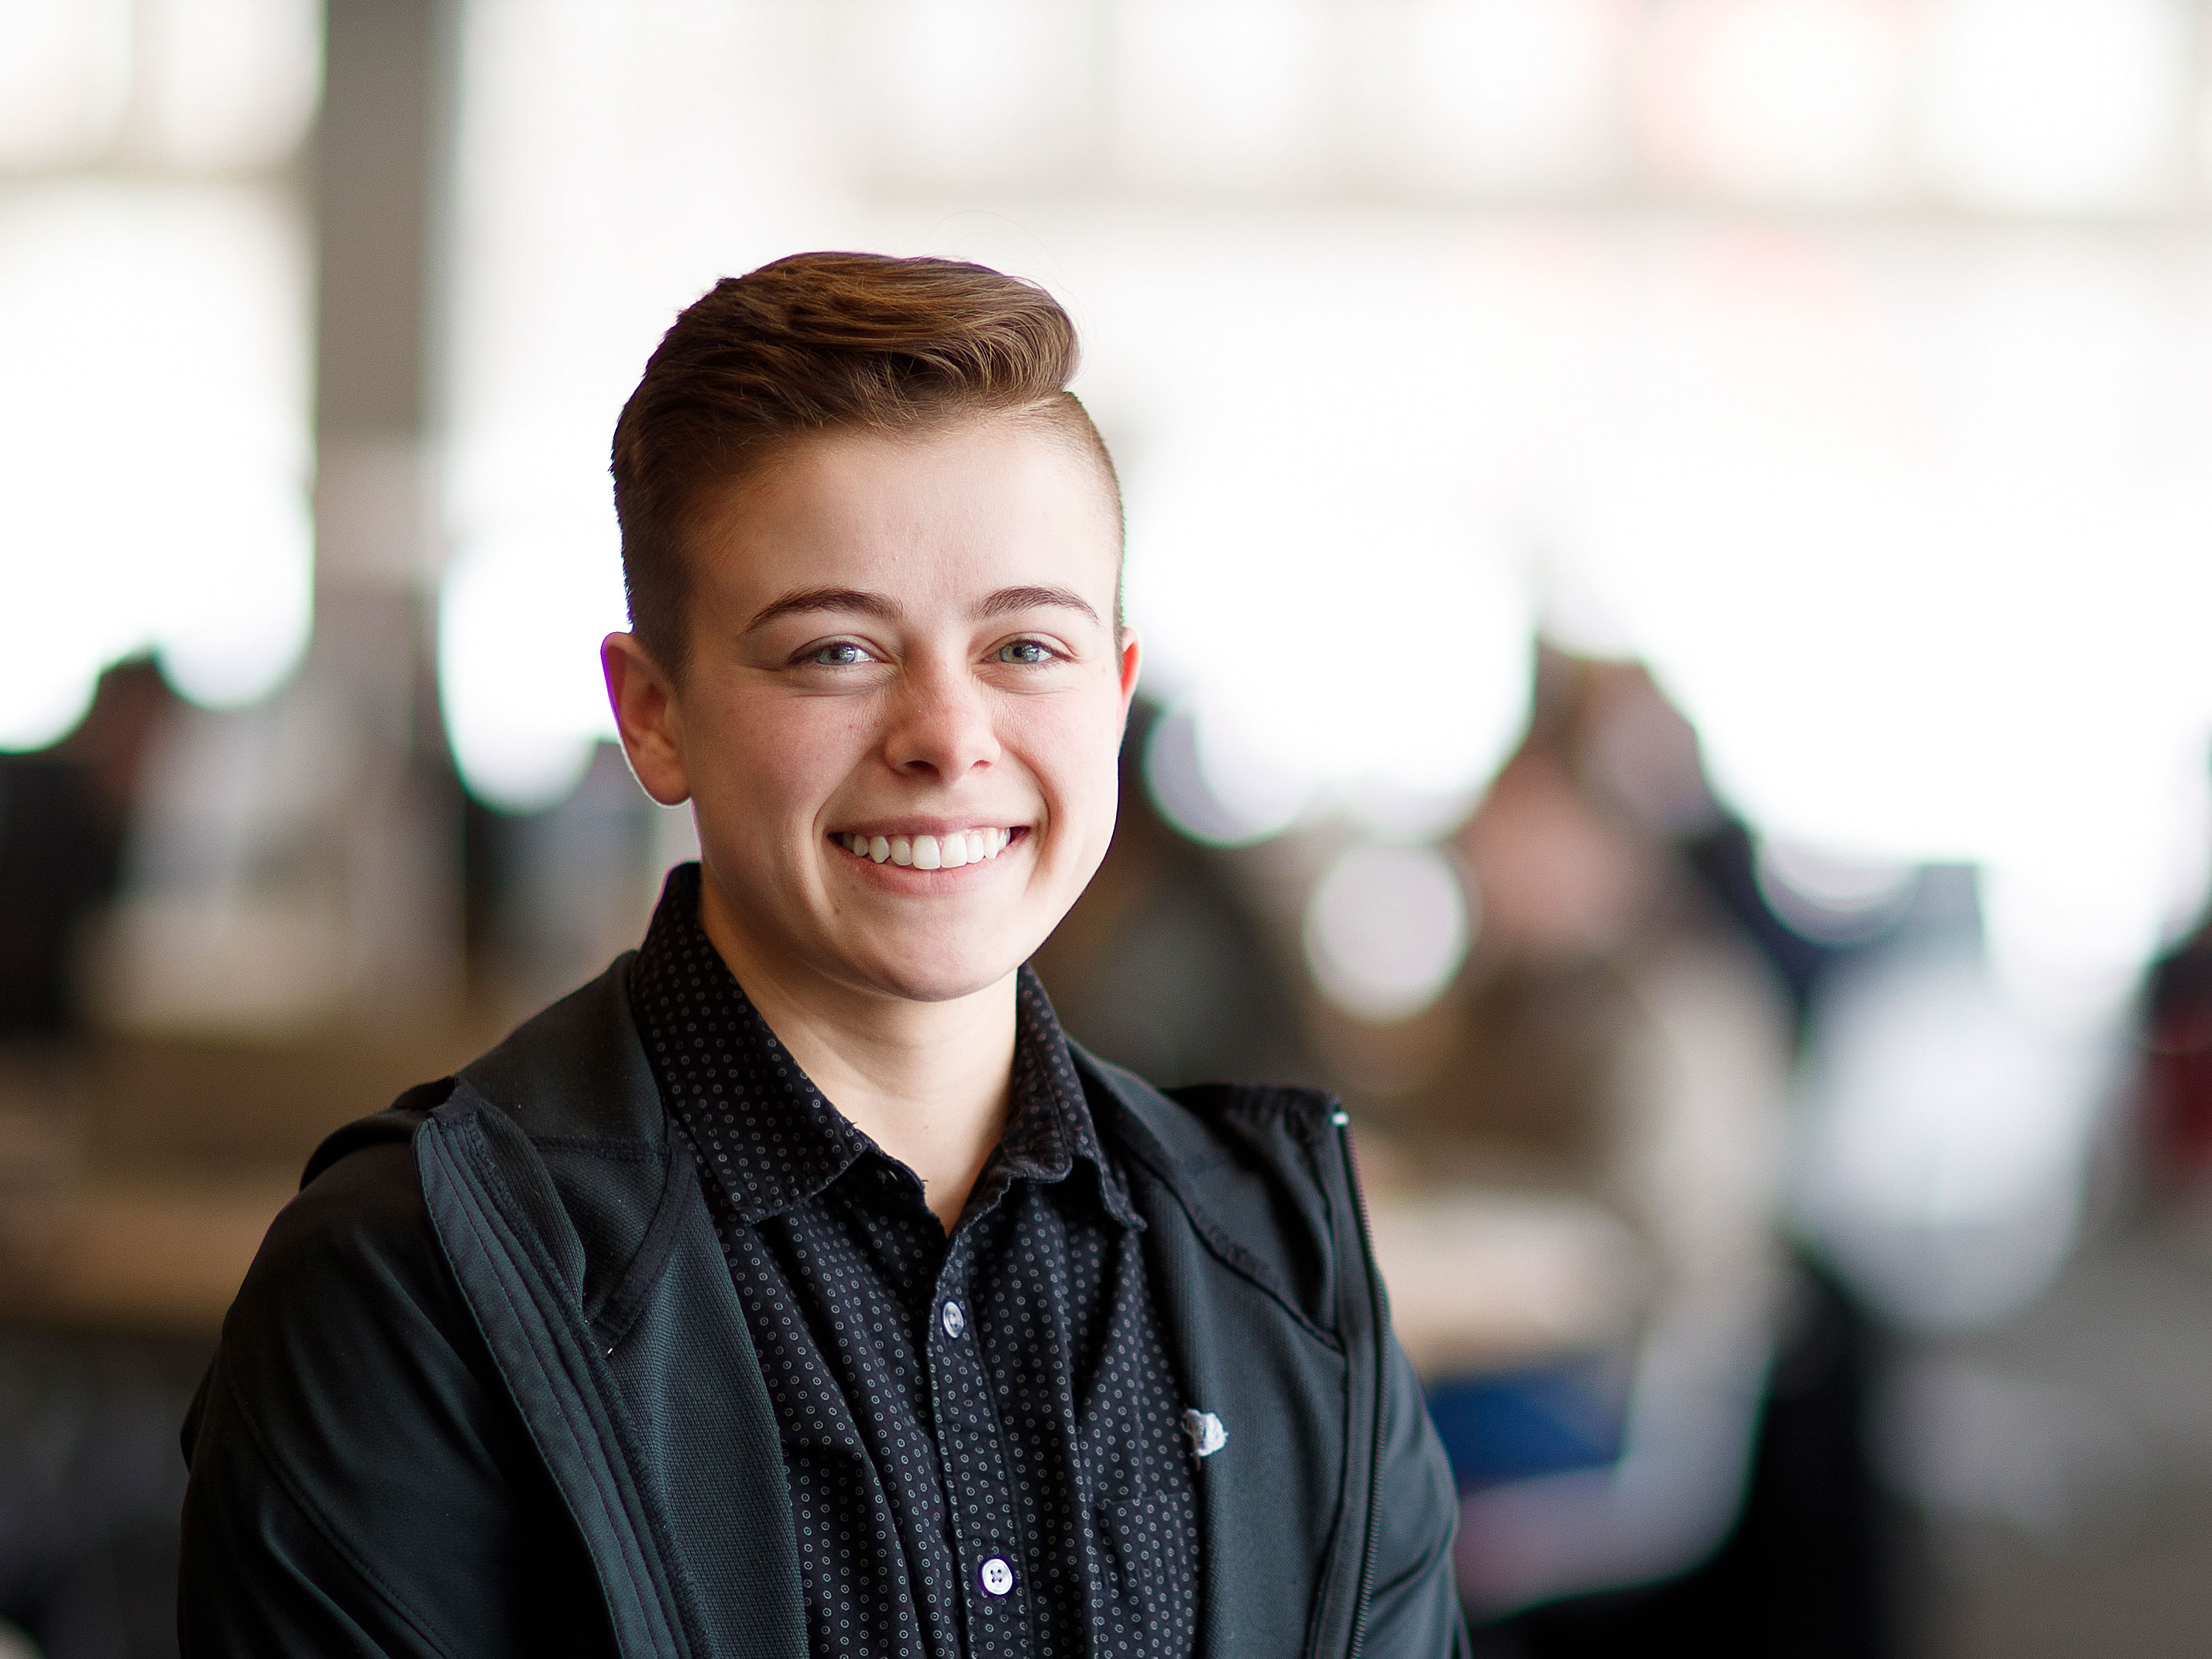 Junior Kai Meacham was chosen to receive a Chancellor’s Award for Outstanding Contributions to the Gay, Lesbian, Bisexual and Transgender Community.